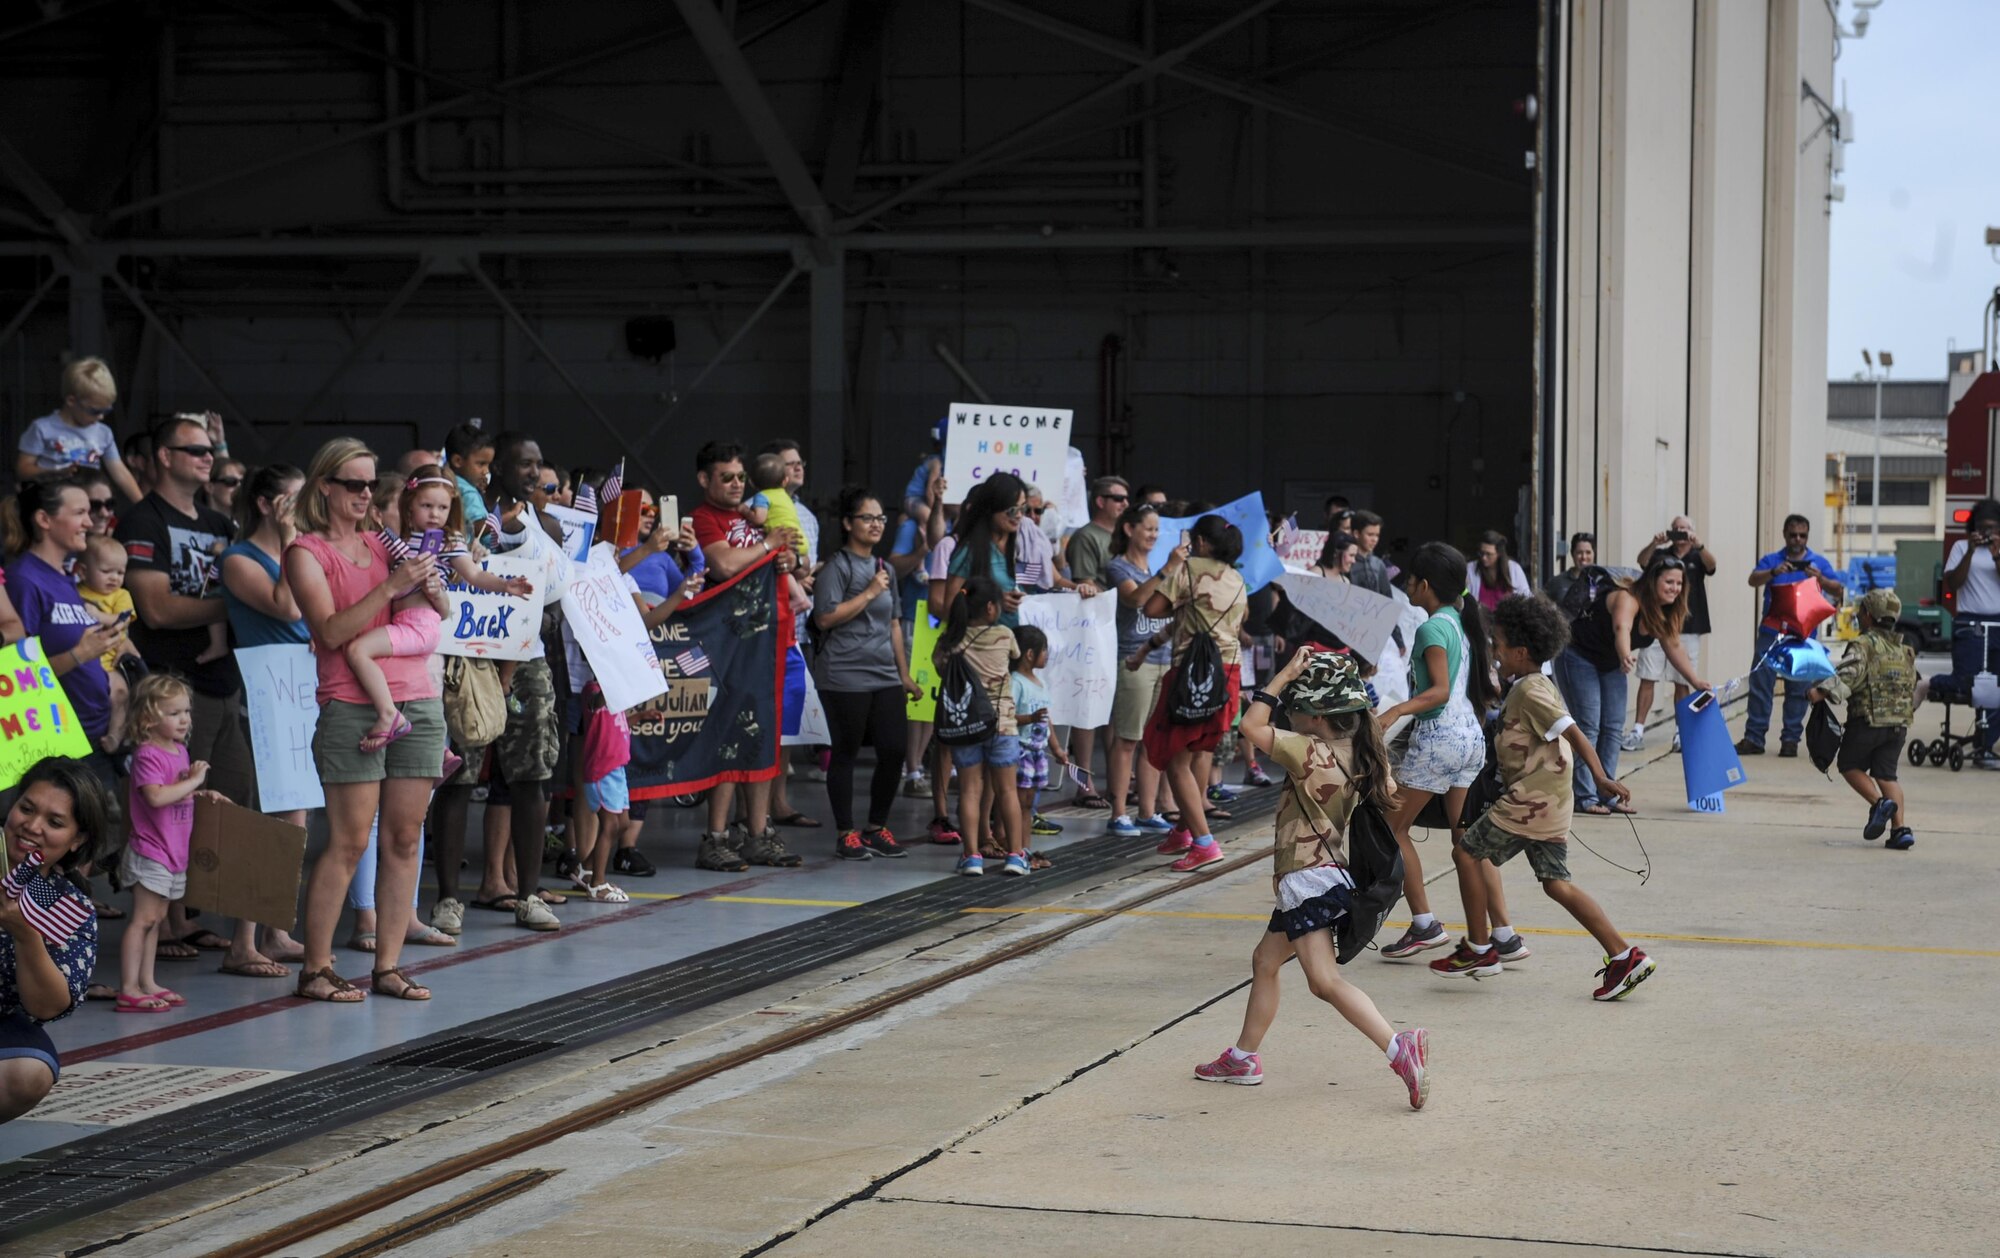 Children run to their parents at a “homecoming” during Operation Kids Understanding Deployment Operations at Hurlburt Field, Fla., April 30, 2016. The homecoming helped show children what it feels like to return to family members after a deployment. (U.S. Air Force photo by Senior Airman Meagan Schutter)